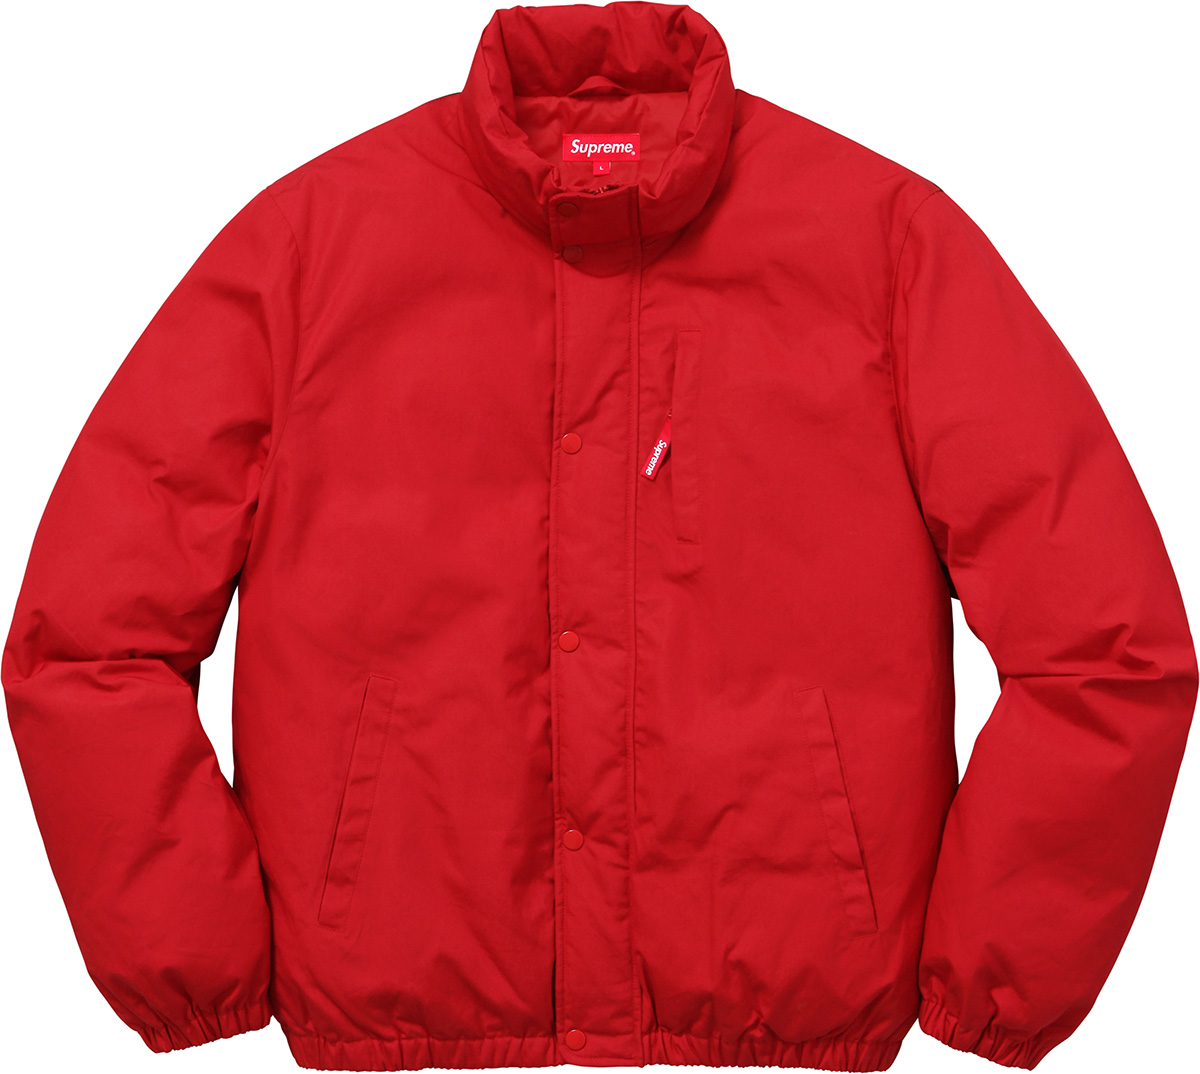 Supreme Astronaut Puffy Jacket Red